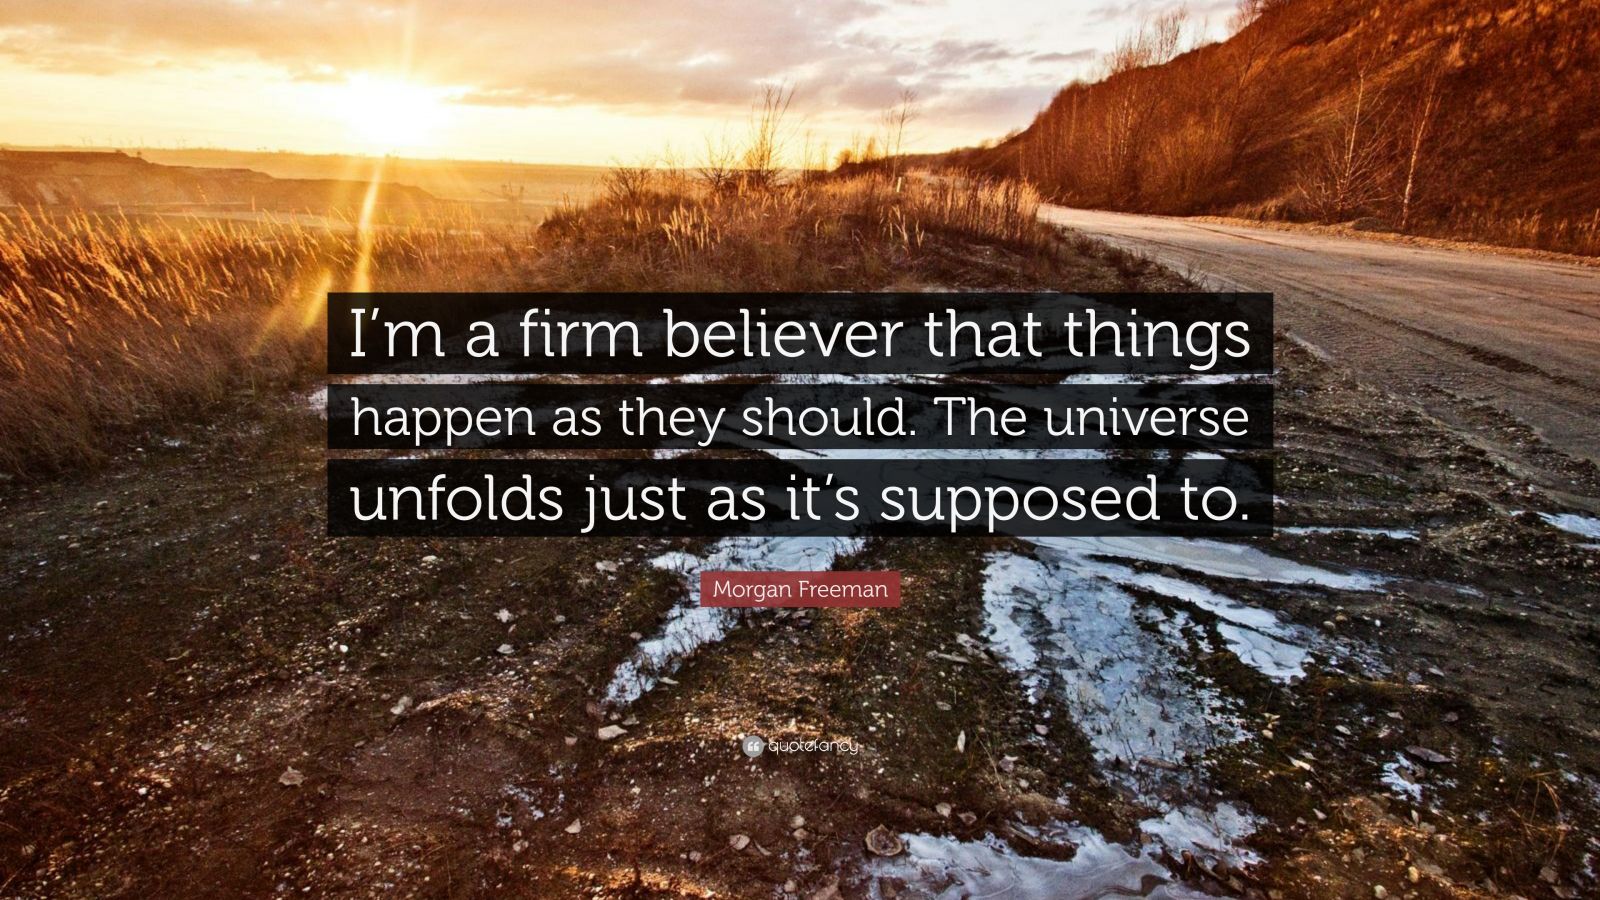 Morgan Freeman Quote: “I'm a firm believer that things happen as they  should. The universe unfolds just as it's supposed to.”